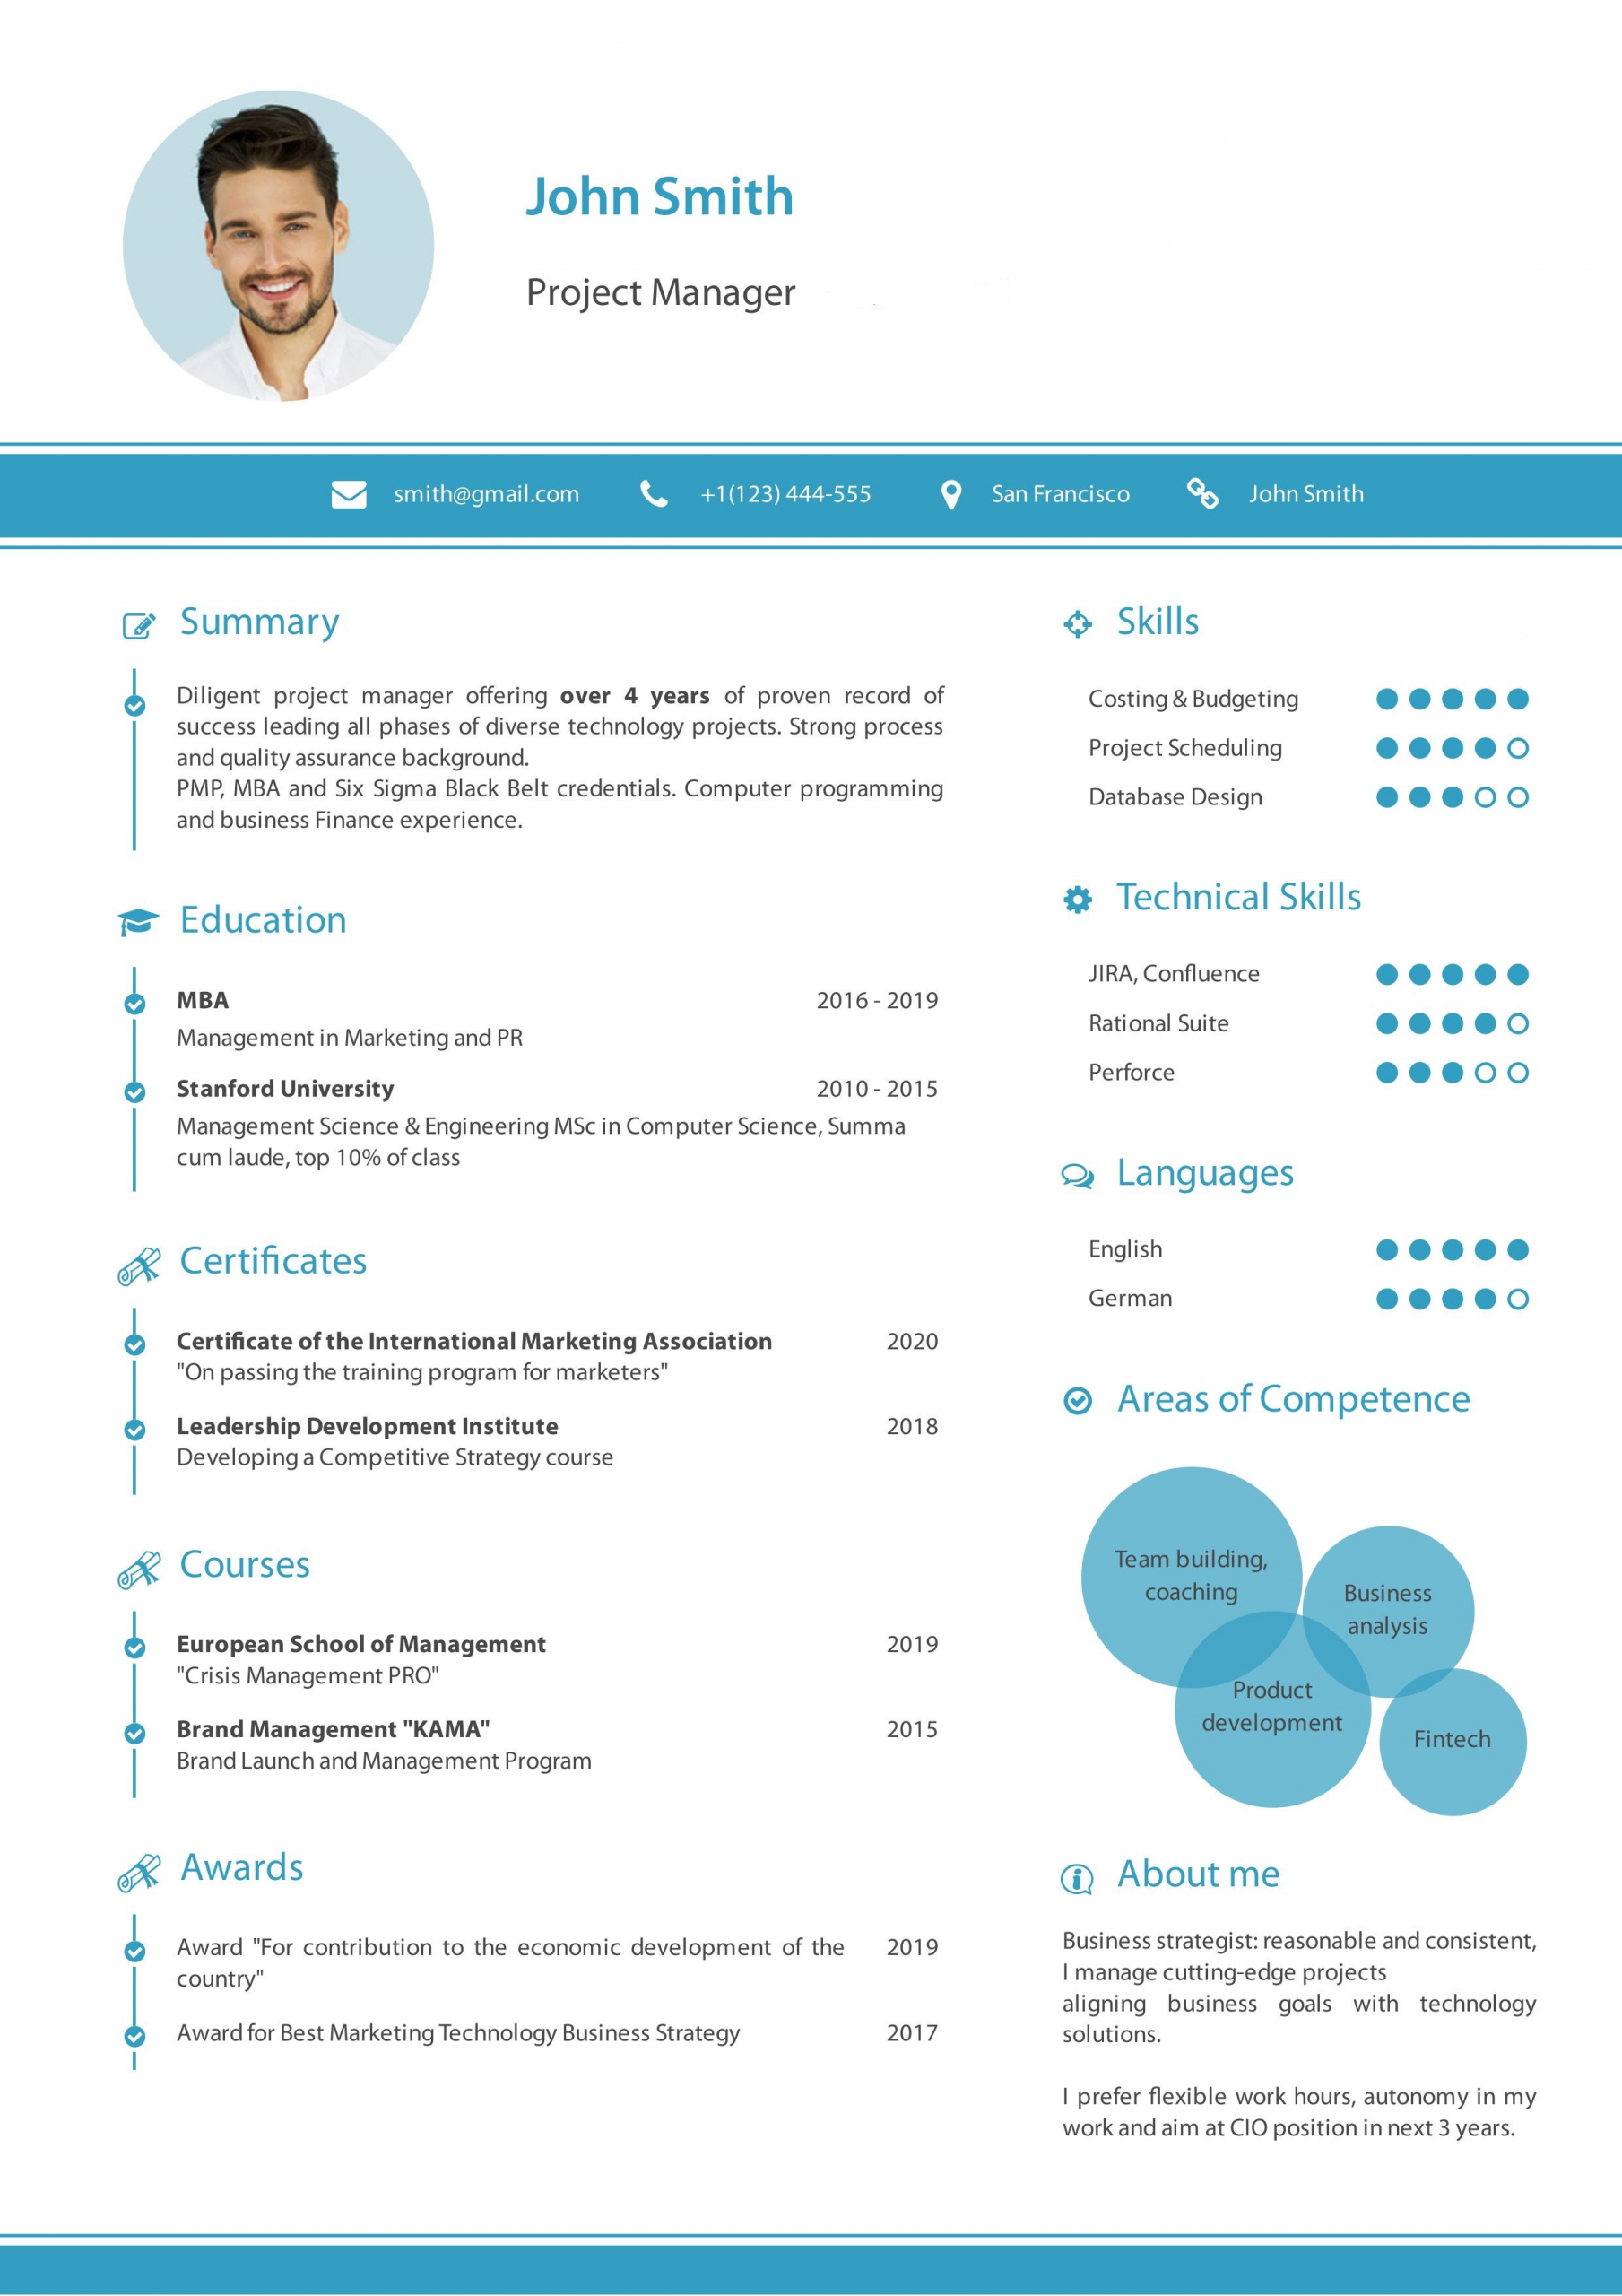 Sample resume template with infographic